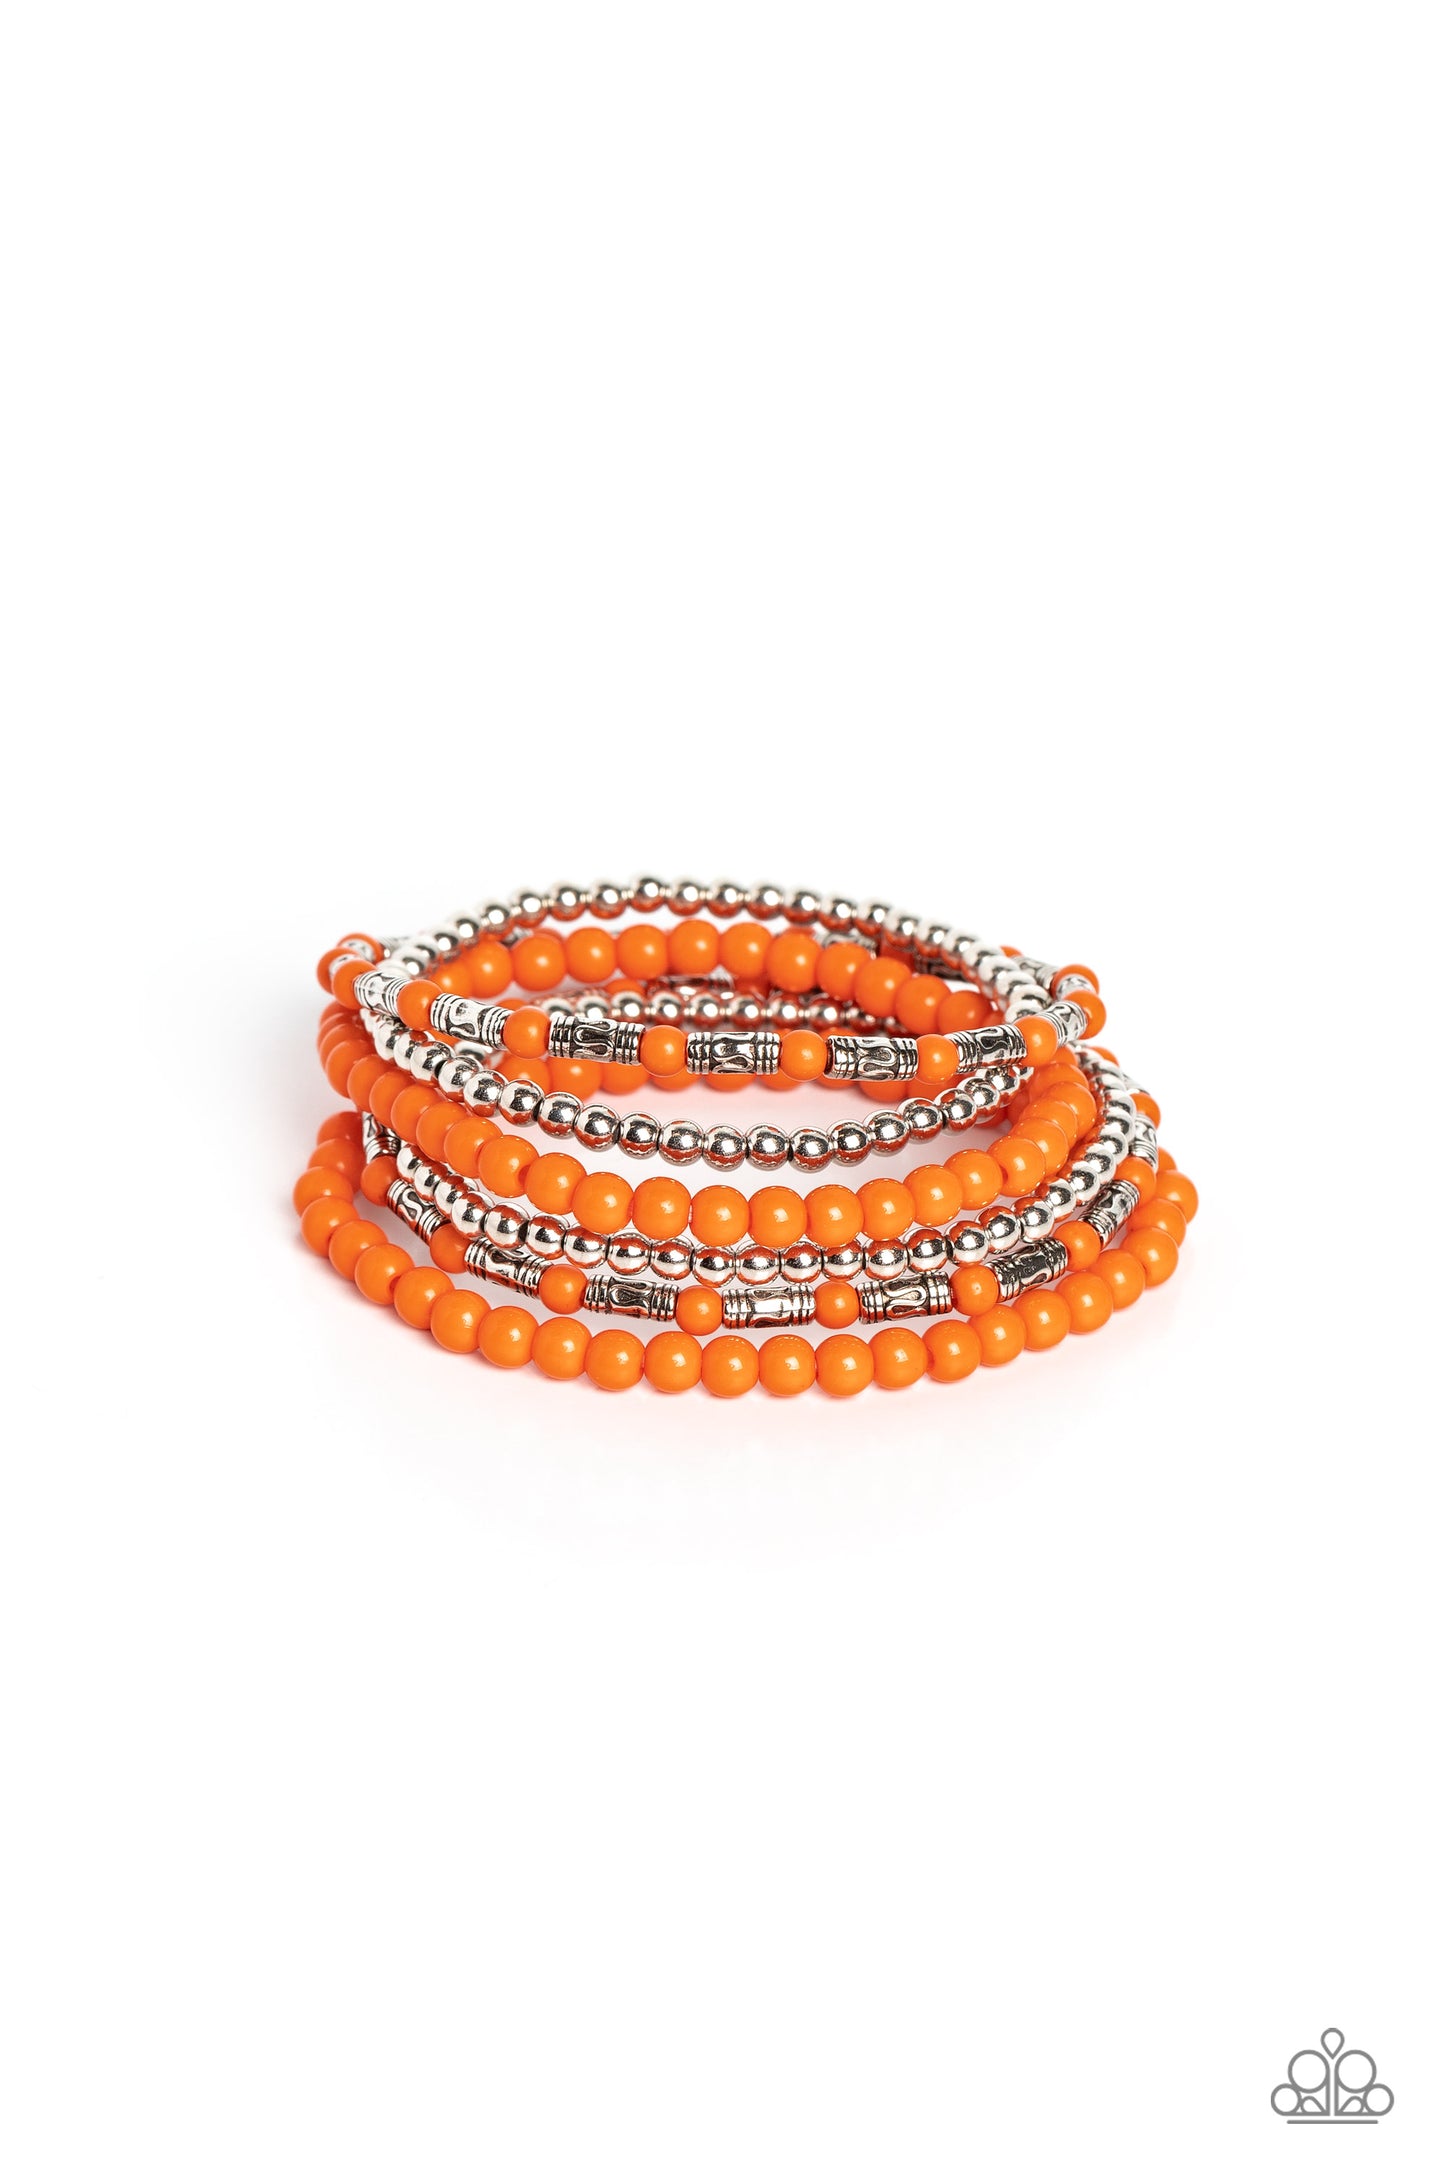 Mythical Magic Orange Bracelet - Paparazzi Accessories  A trendy collection of orange, silver and silver cylindrical textured beads wrap around the wrist on elastic stretchy bands for a colorful, seasonal stack.  Sold as one set of six bracelets.  P9SE-OGXX-200XX